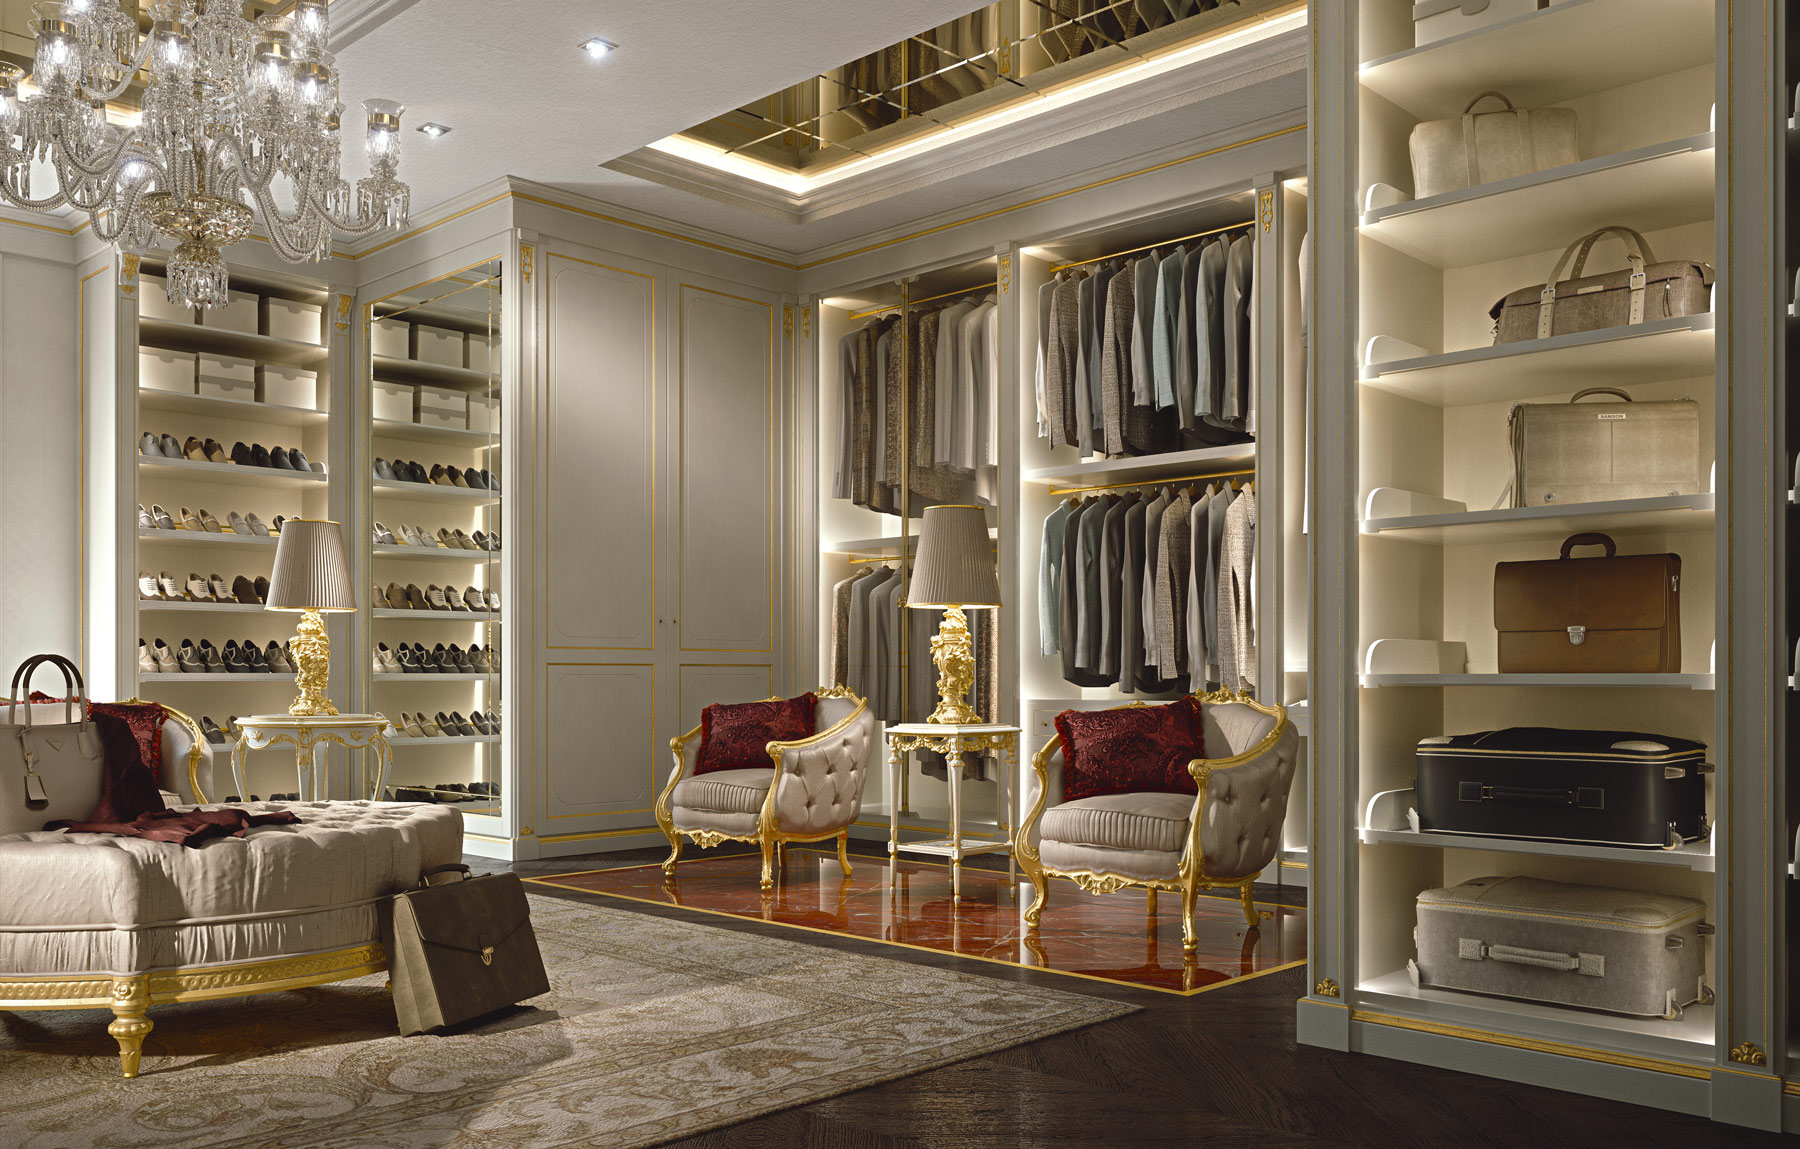 Dressing Room Design For House in Abuja, Nigeria